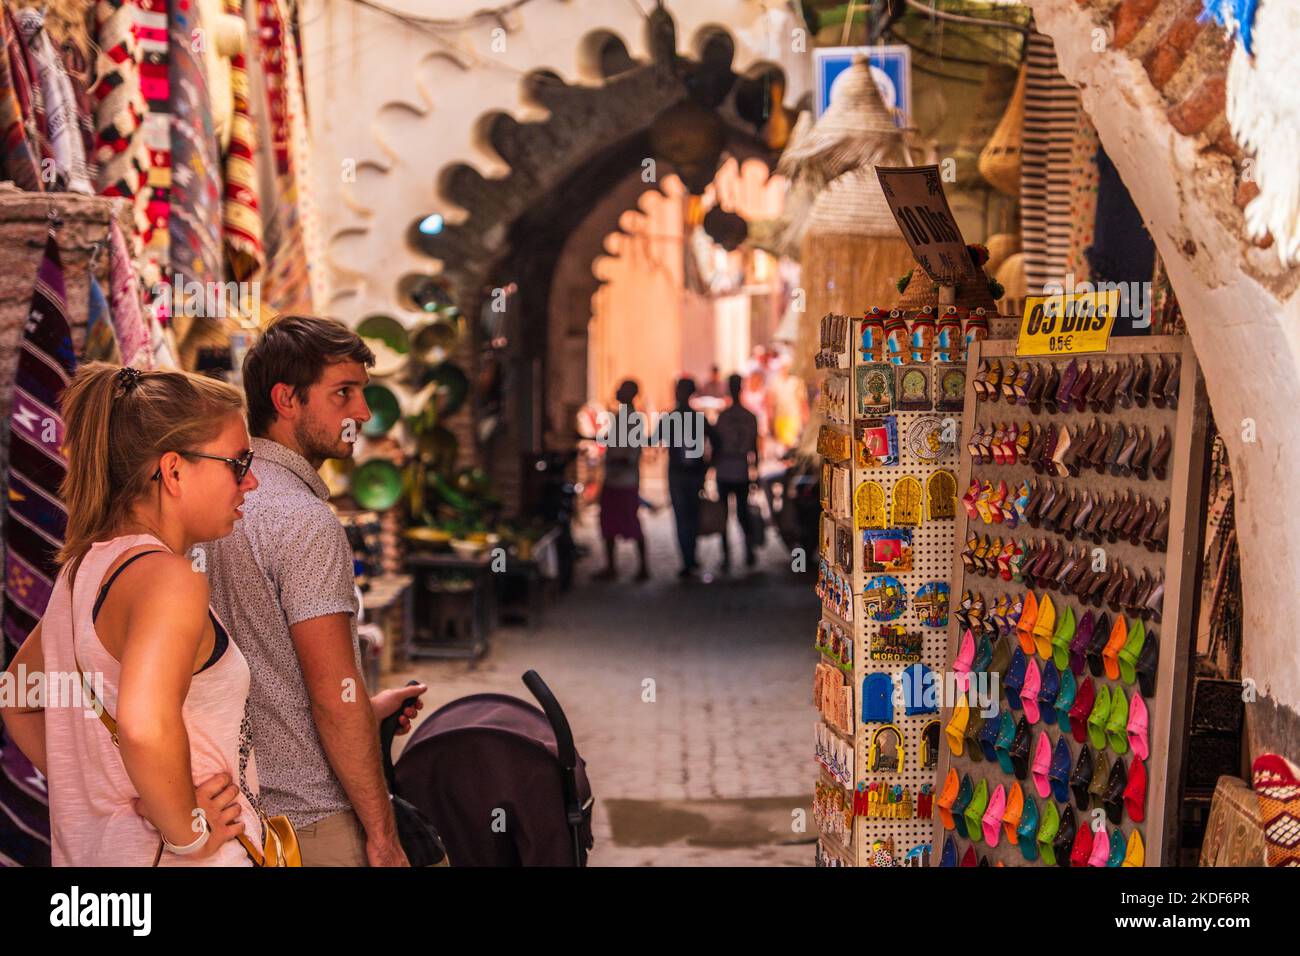 Visitors shopping for souvenirs In the souqs of the  medina ( old town) of Marrakech, Morocco Stock Photo